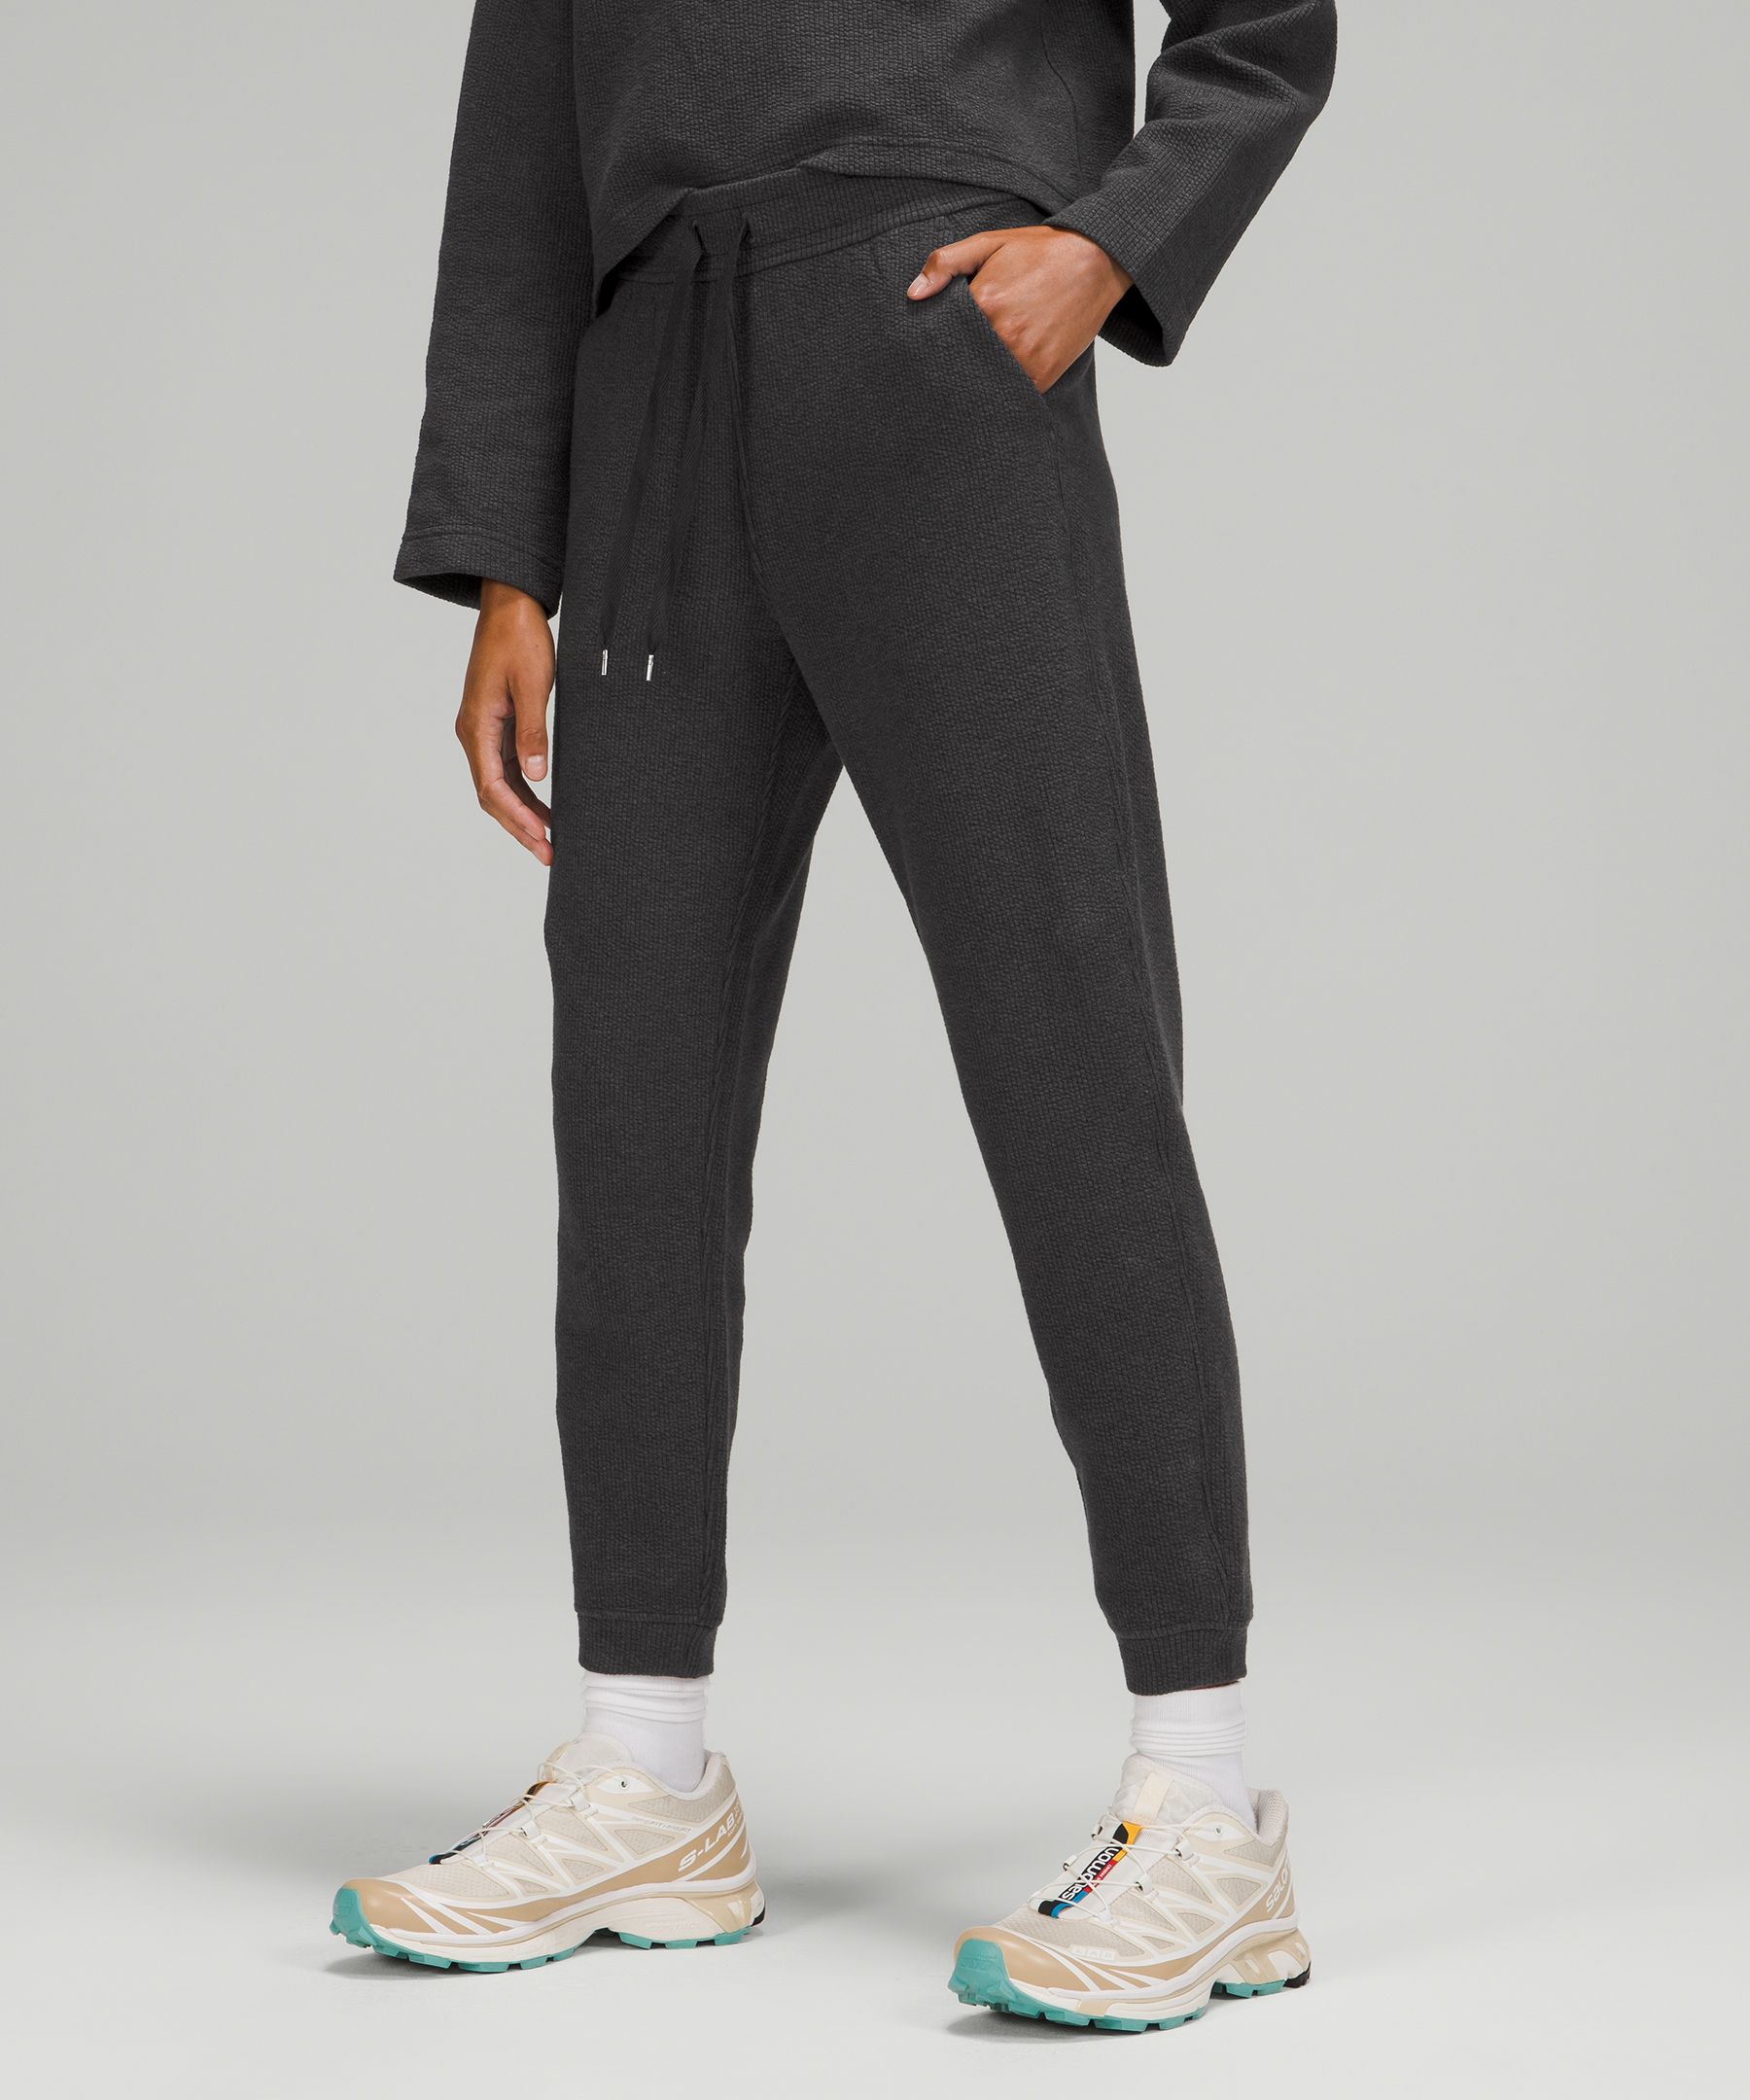 I don't know why I ever slept on the ribbed HR jogger *7/8 Length